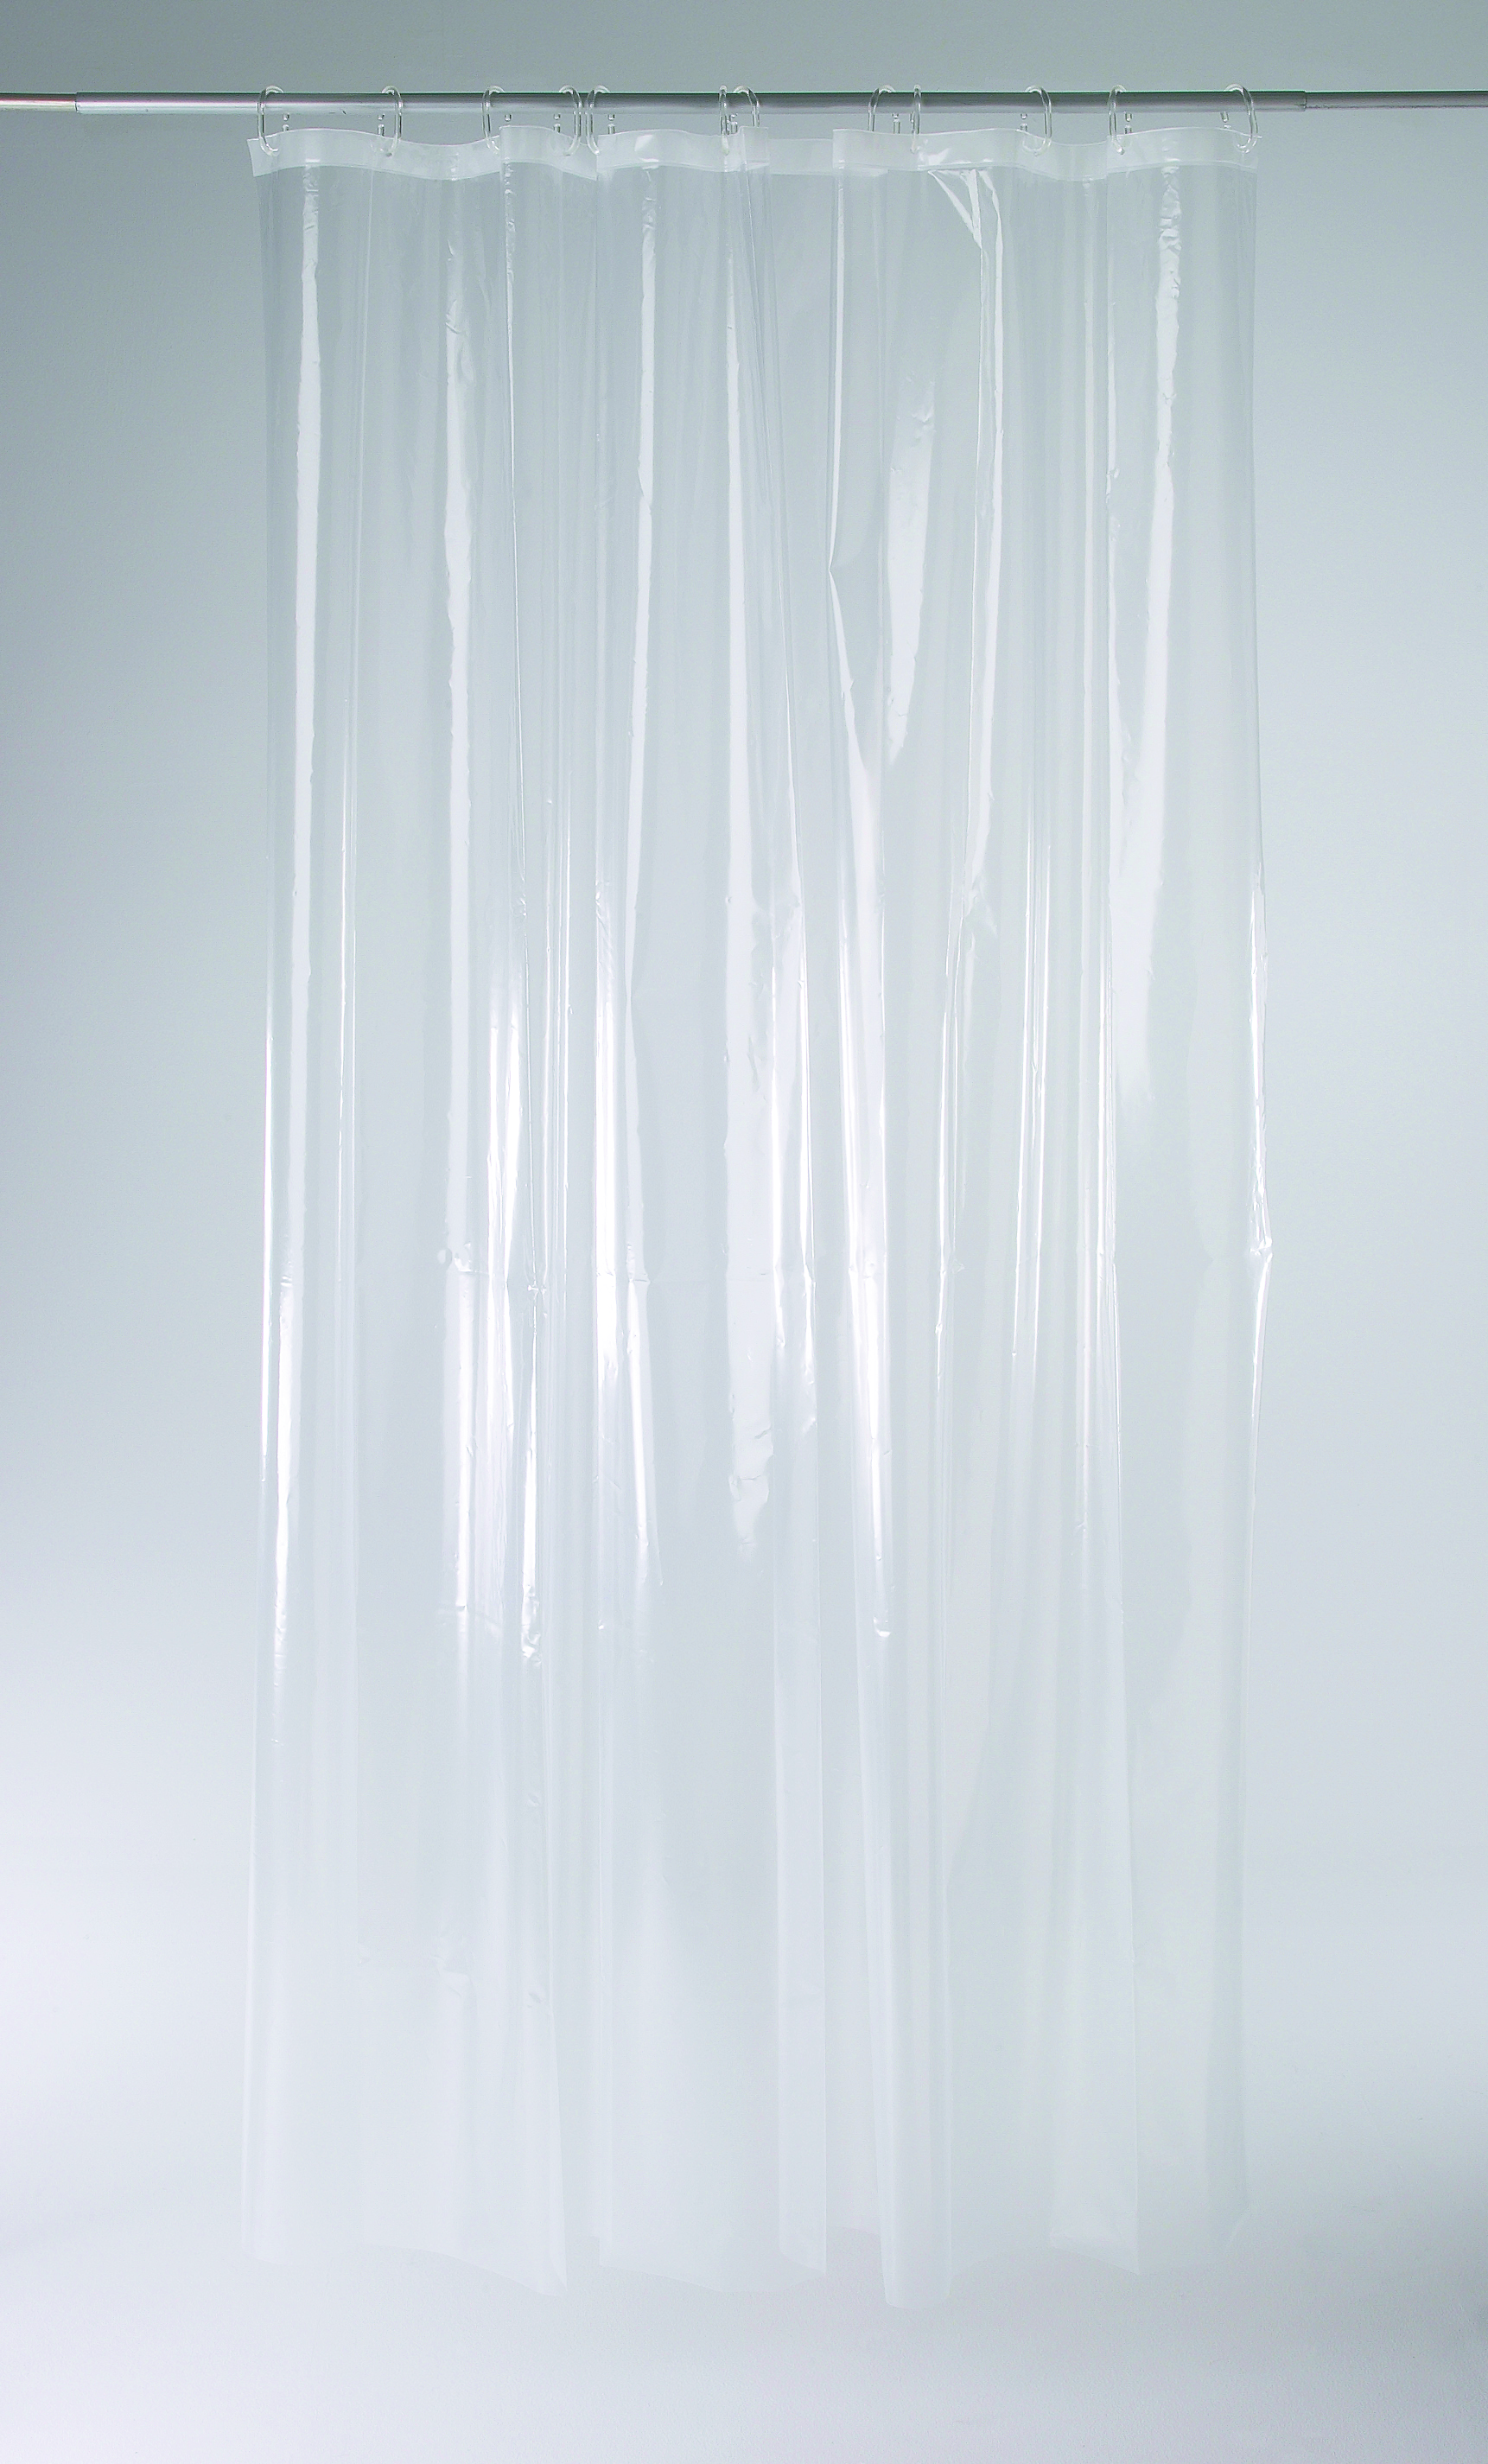 Ikea Shower Curtain for Best Your Bathroom Decoration: Shower Curtain Transparent | 84in Shower Curtain | Ikea Shower Curtain